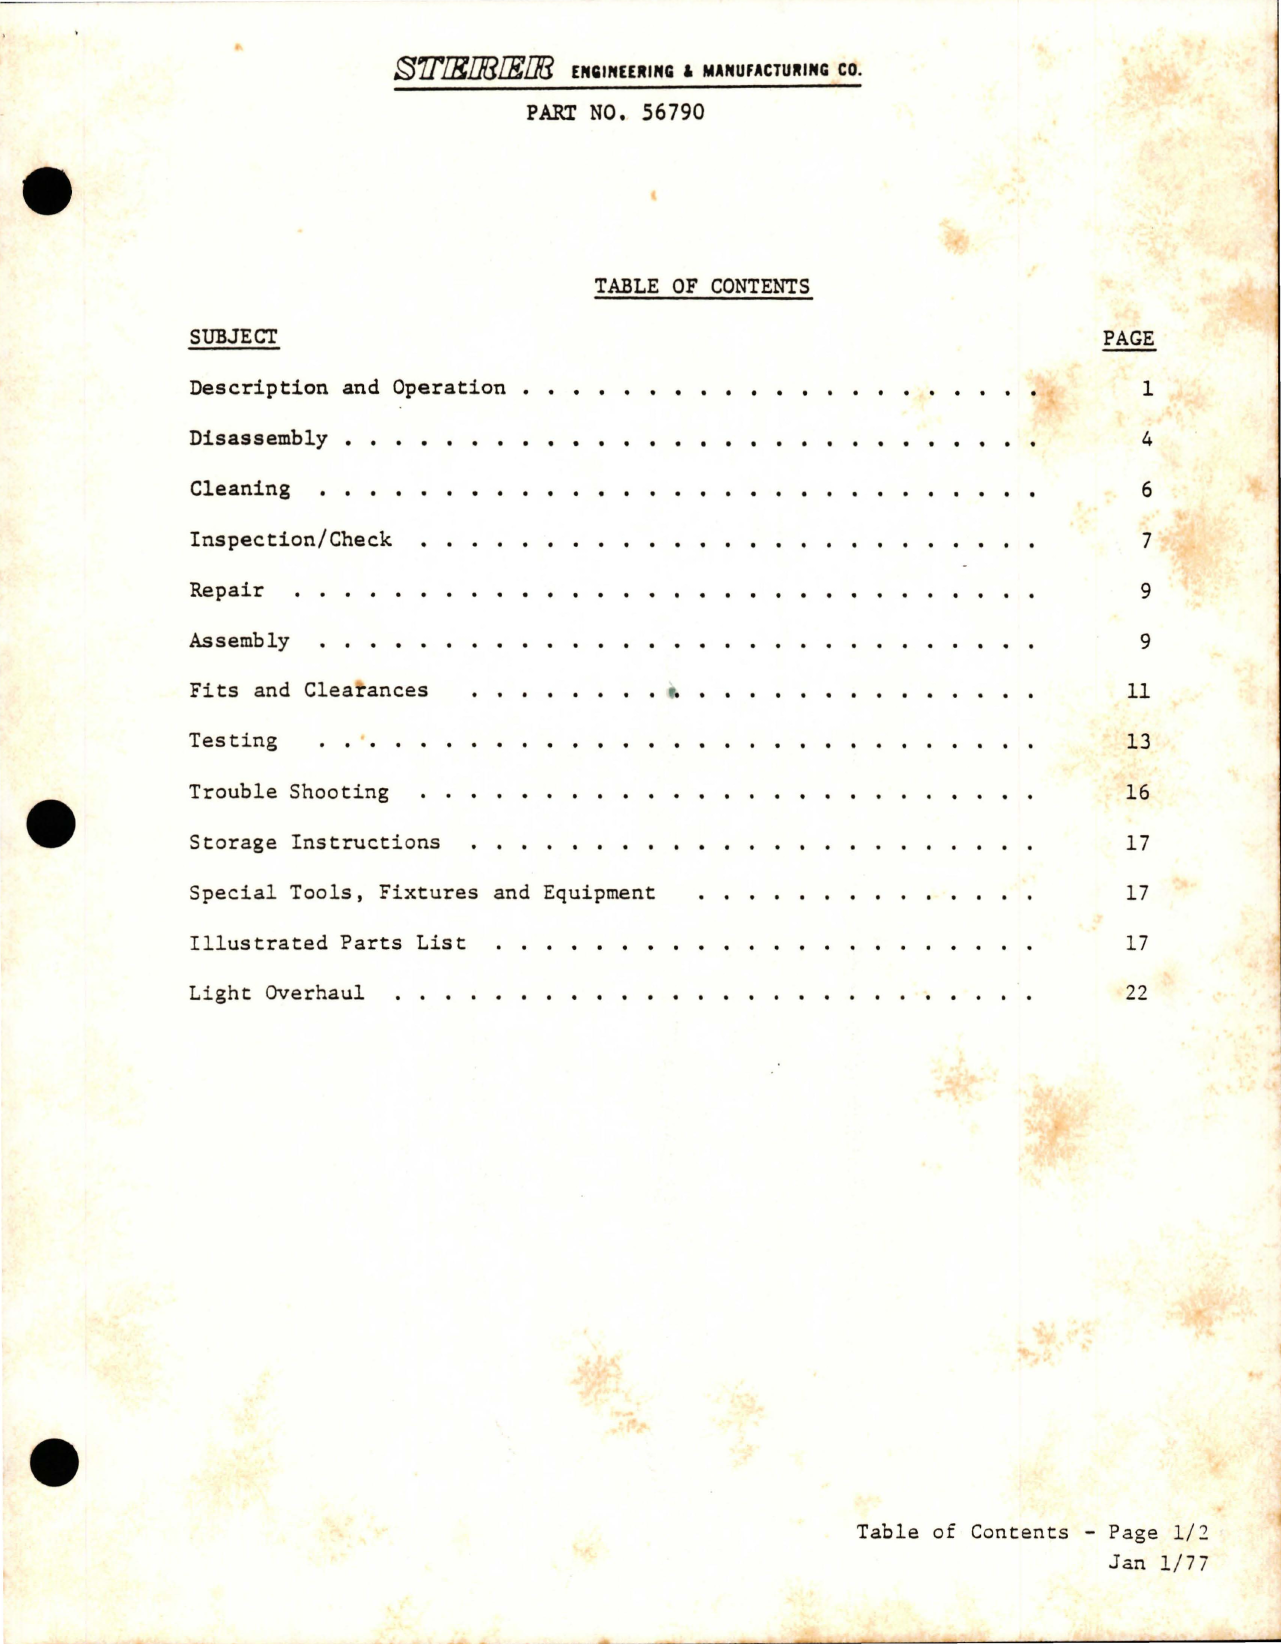 Sample page 7 from AirCorps Library document: Overhaul with Illustrated Parts List for Solenoid Operated Landing Gear Valve Assembly - Part 56790